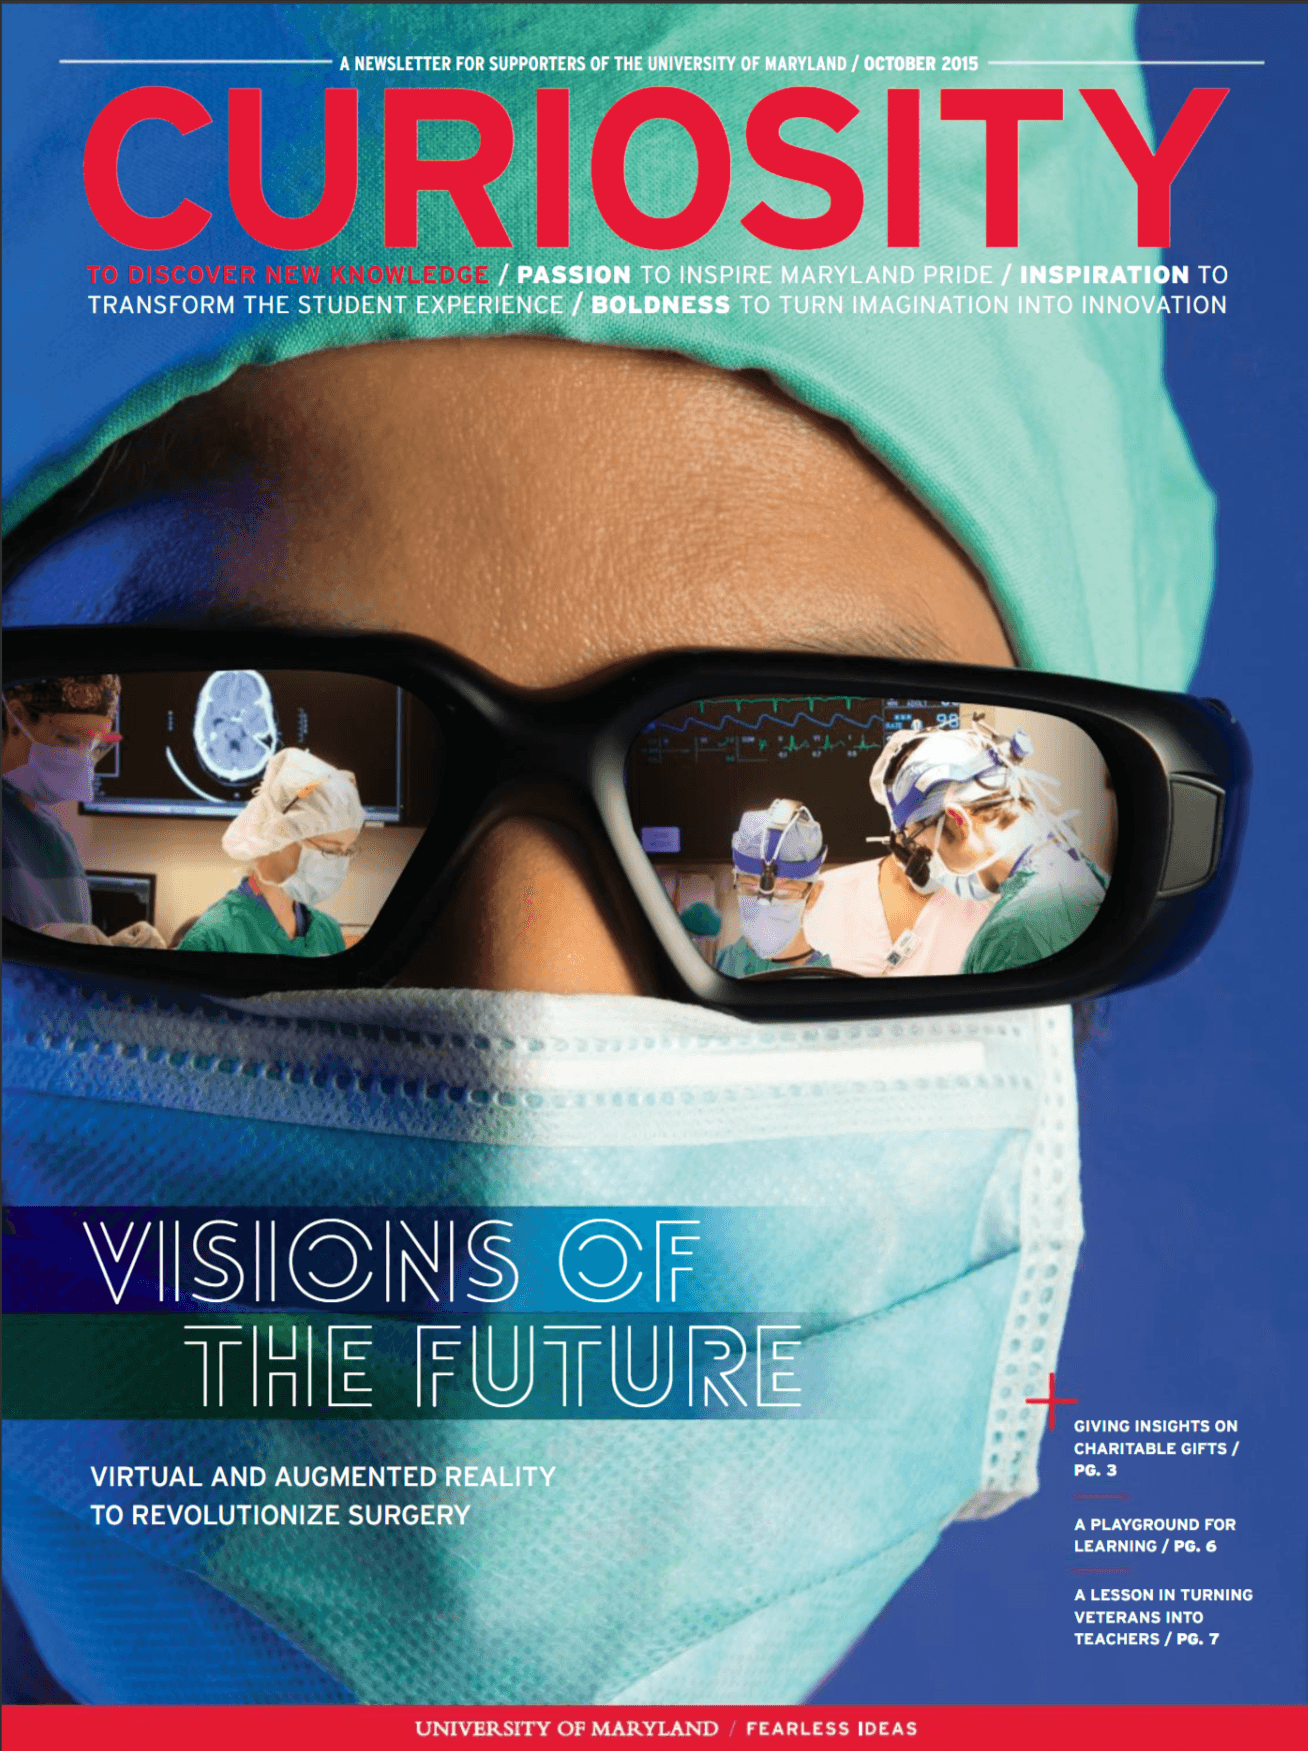 Cover of October 2015 Giving Newsletter. Surgeon wearing reflective sunglasses